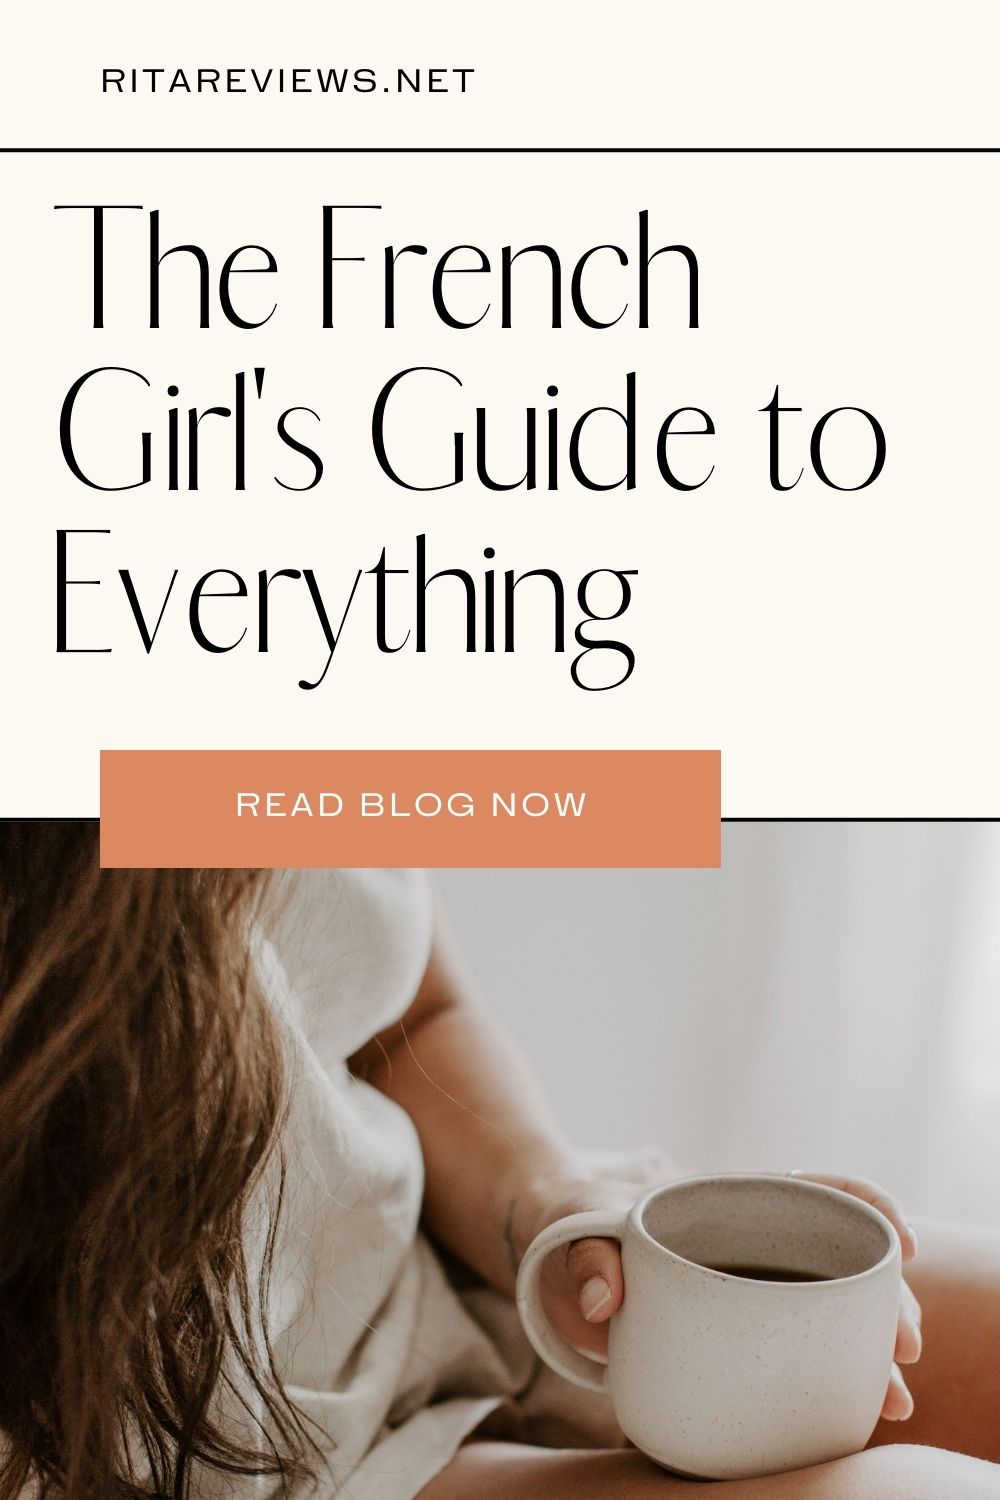 The French Girl's Guide to Everything